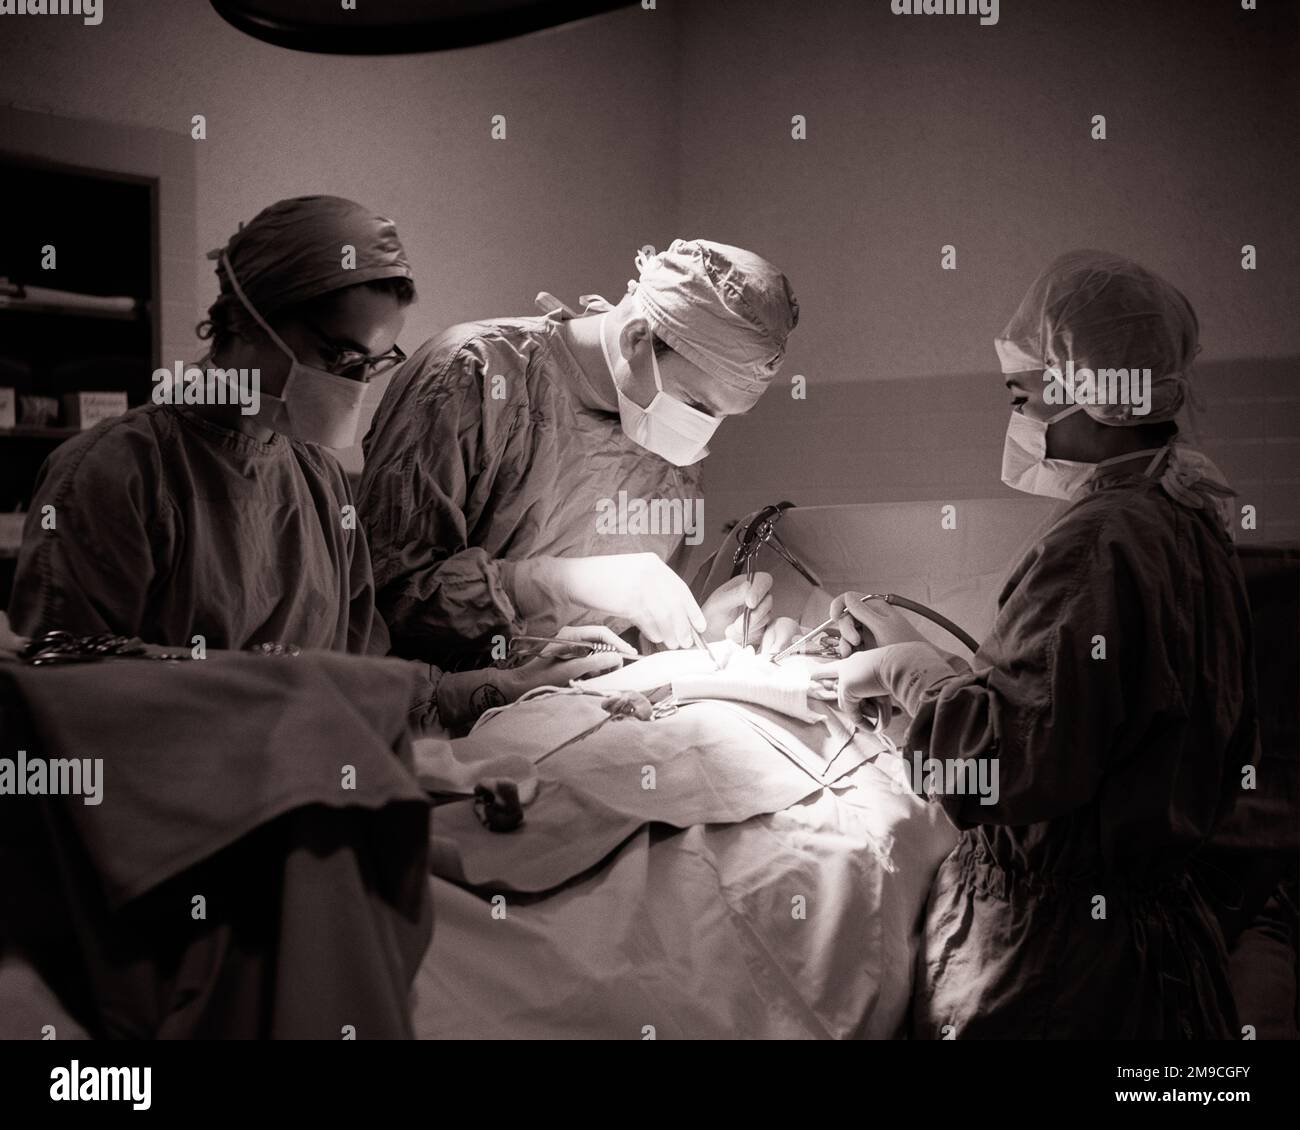 1960s MAN DOCTOR SURGEON AND TWO WOMEN ATTENDANT SURGICAL NURSES ASSISTING PERFORMING A SURGERY IN HOSPITAL OPERATING ROOM - m8986 HAR001 HARS TEAMWORK FEMALES JOBS ILLNESS COPY SPACE HALF-LENGTH LADIES PERSONS CARING MALES RISK PROFESSION CONFIDENCE B&W GOALS HEALTHCARE PERFORMING SURGERY SKILL OCCUPATION SKILLS OPERATING PREVENTION PROVIDER PROVIDERS PRACTITIONERS HEALING AND DIAGNOSIS SURGICAL CAREERS KNOWLEDGE LEADERSHIP LOW ANGLE PHYSICIANS LABOR OPERATING ROOM HEALTH CARE EMPLOYMENT IMPAIRMENT OCCUPATIONS SURGEON TREATMENT CONNECTION HEALER HOSPITALS OPERATION PHYSICIAN PRACTITIONER Stock Photo